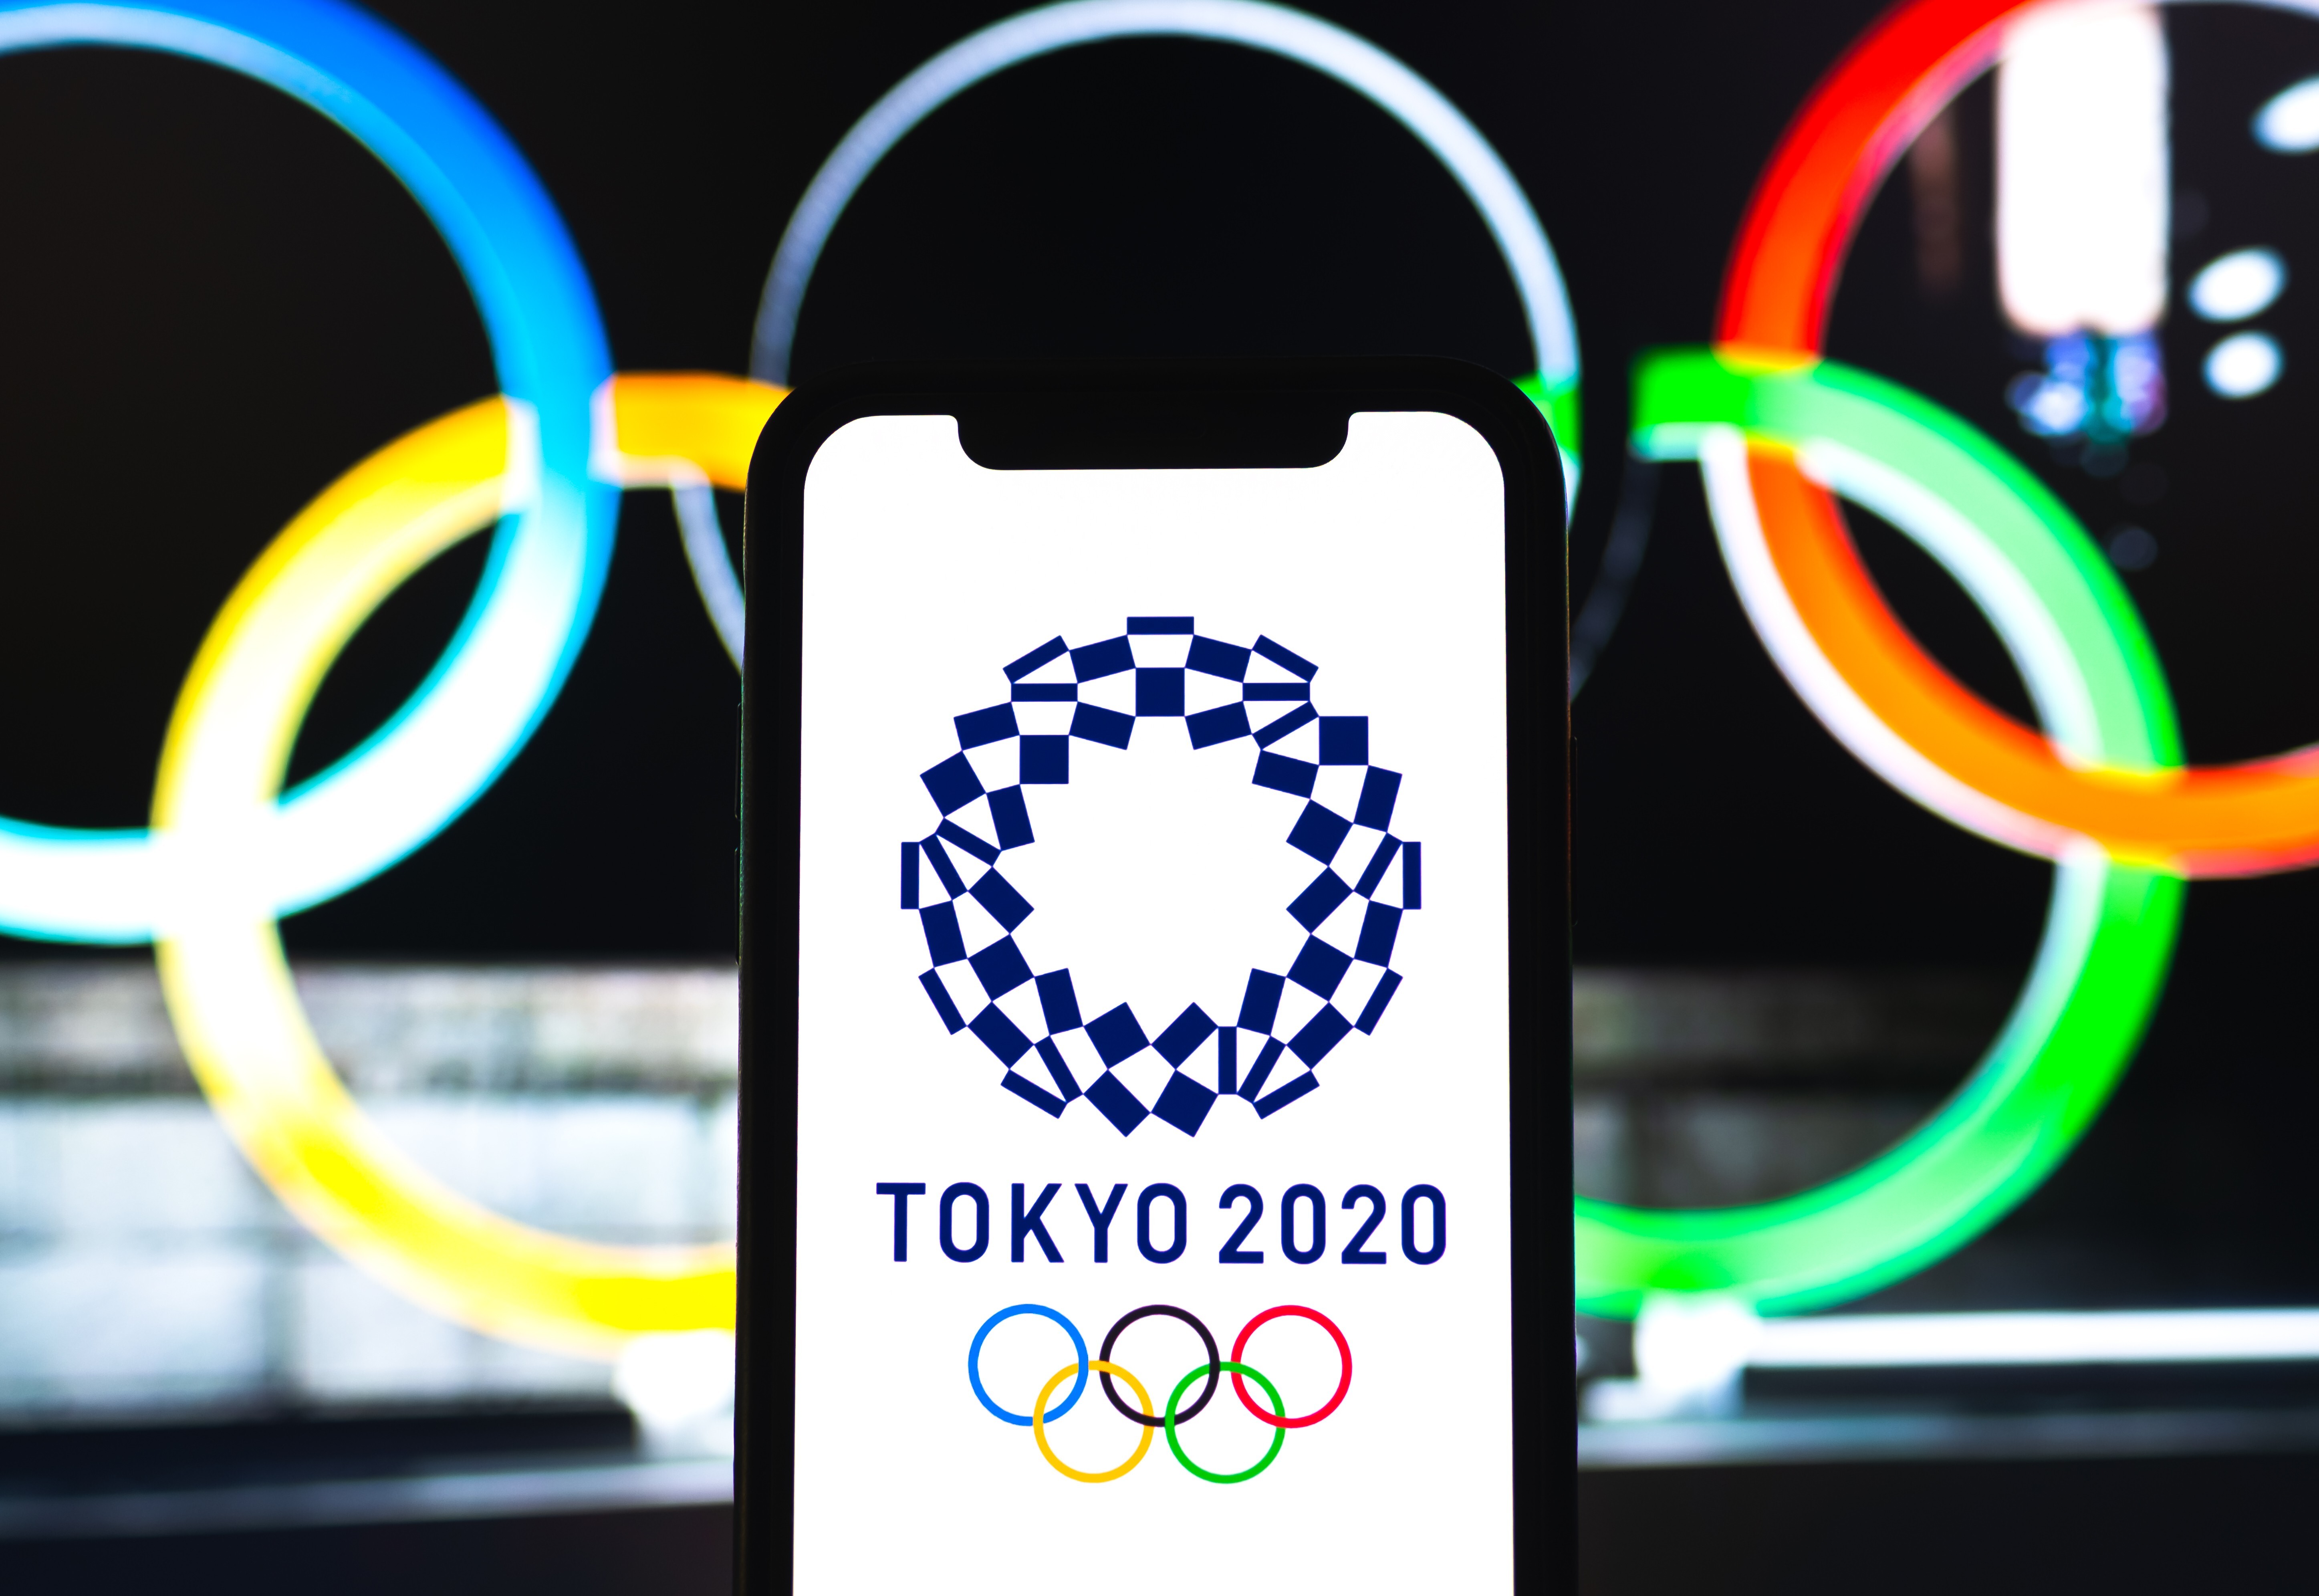 The Olympic Games Tokyo 2020 marks the first use of OBS Cloud, a groundbreaking broadcasting platform that is changing the way the event is presented around the world. Photo: Nikkimeel/Shutterstock